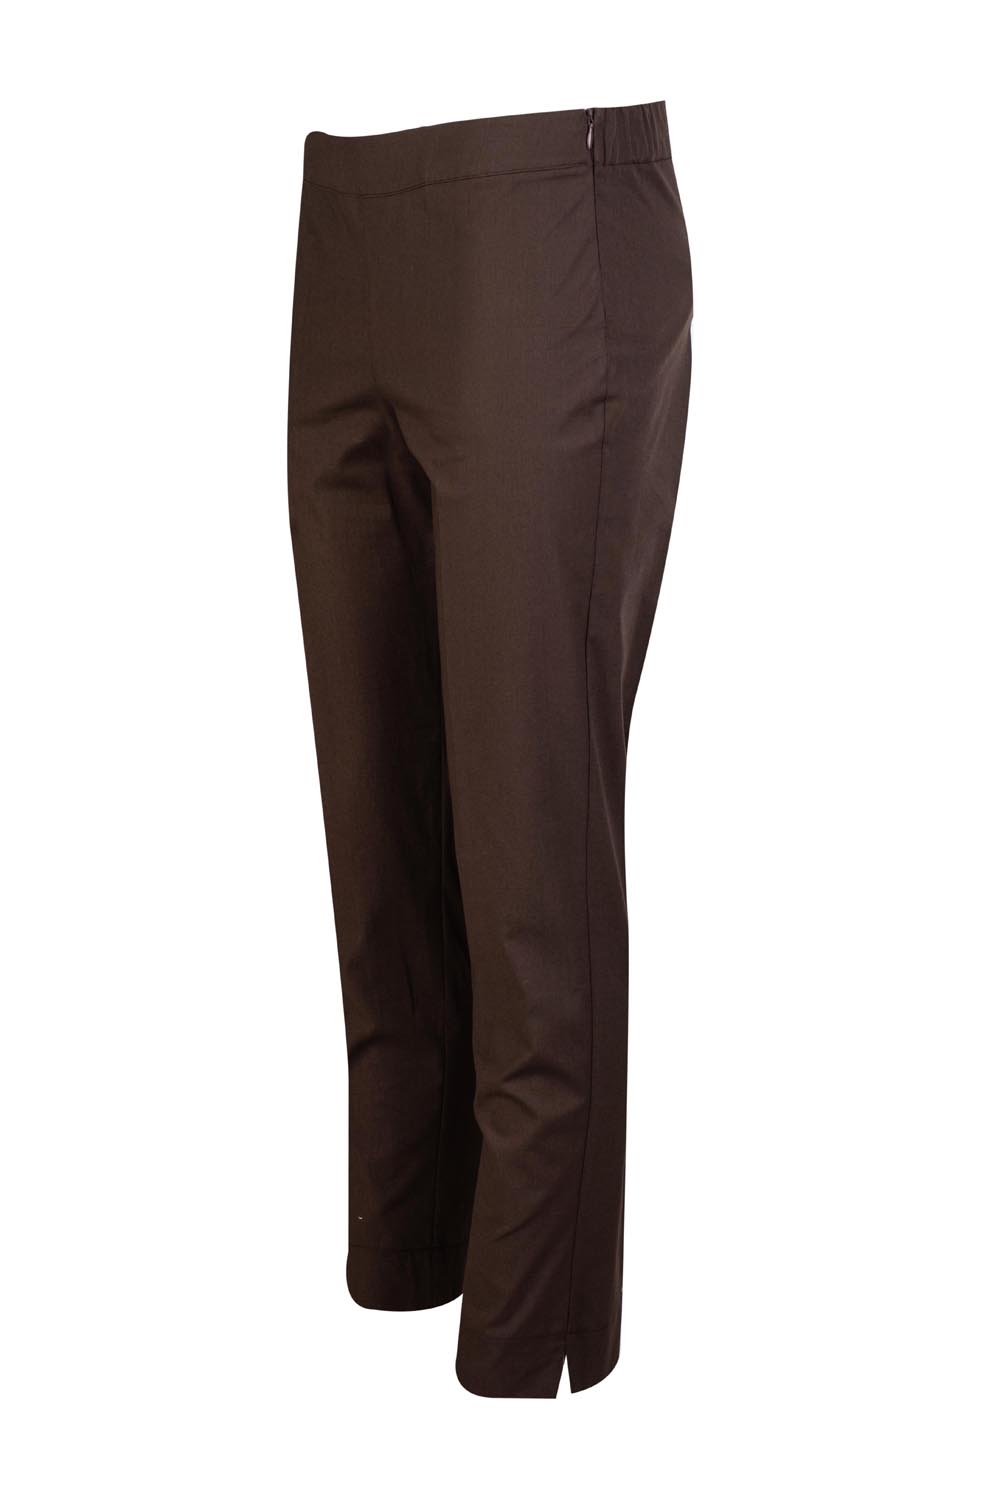 Cotton Capri Trousers with Elasticated Back Waist